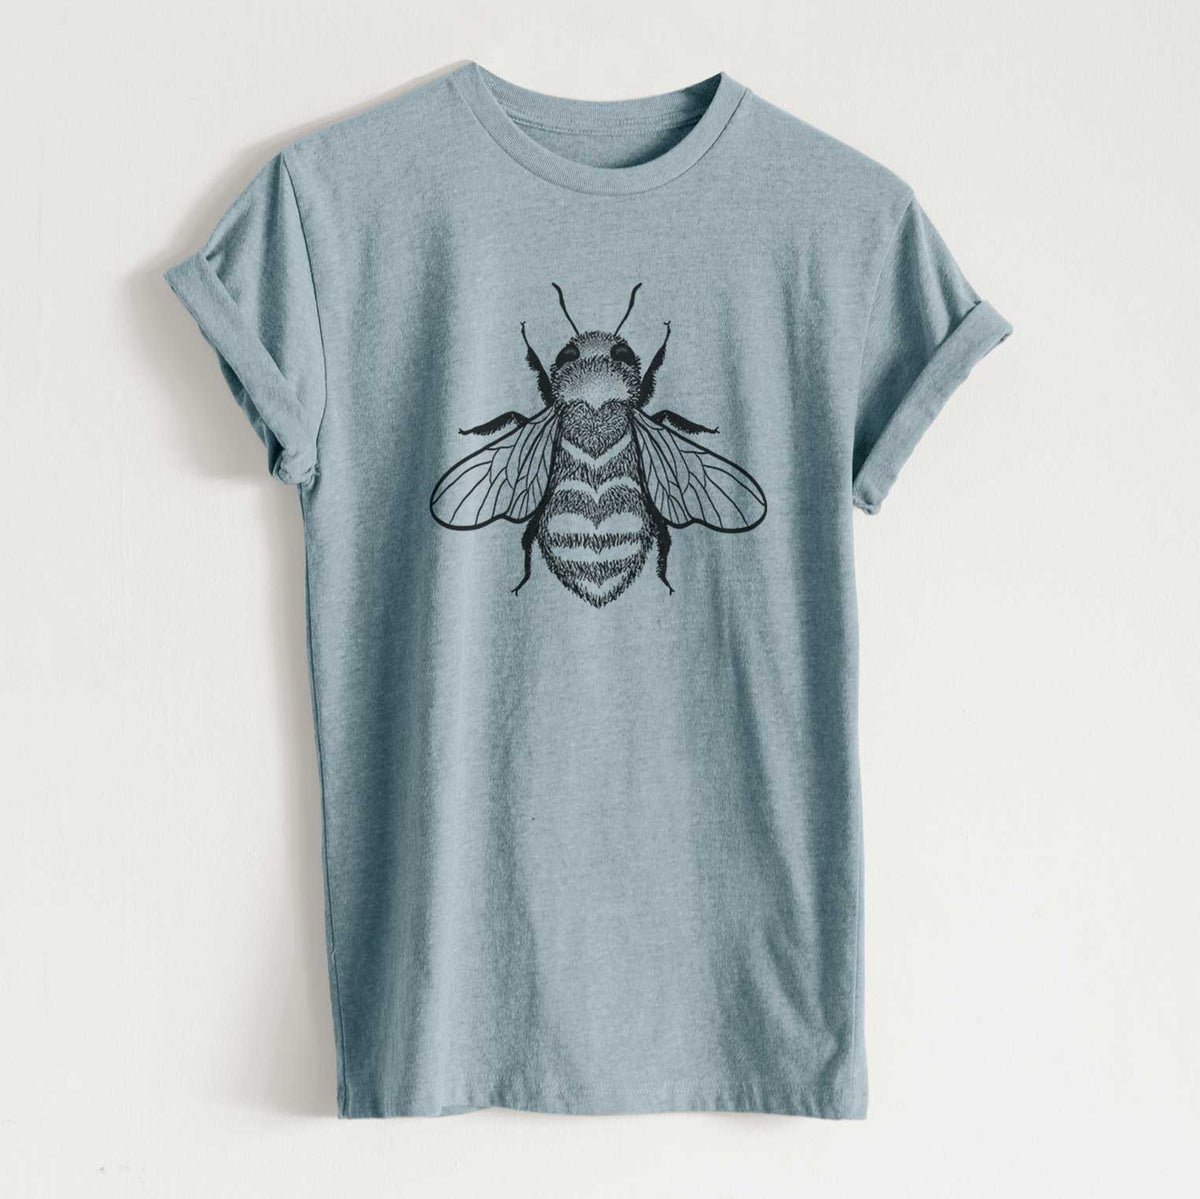 Bee Love - Unisex Recycled Eco Tee  - CLOSEOUT - FINAL SALE